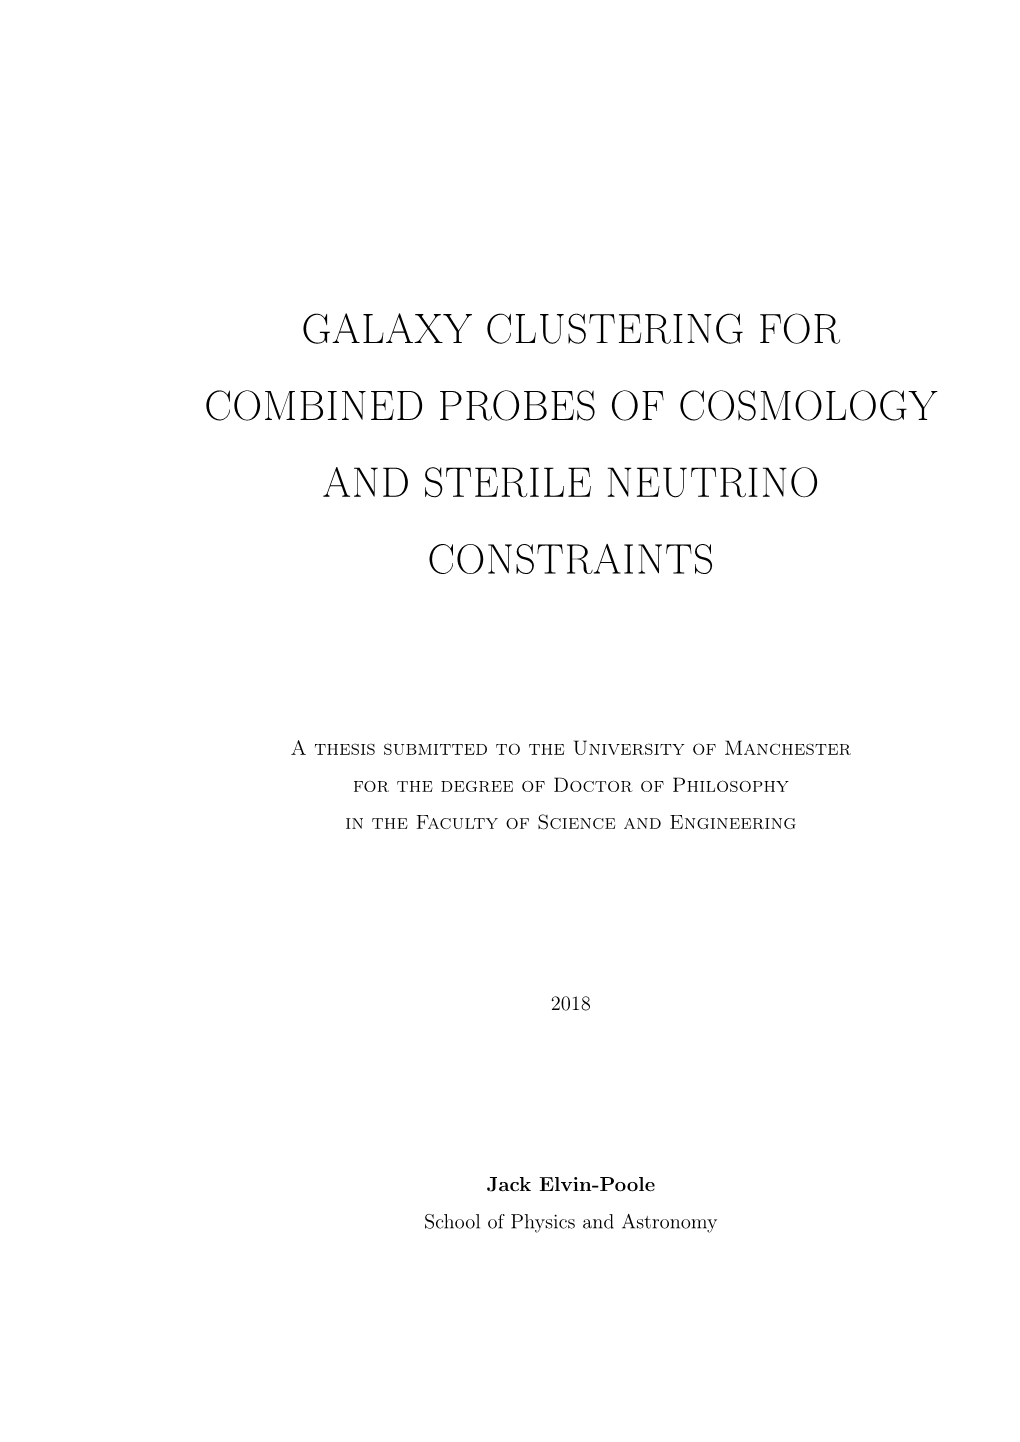 Galaxy Clustering for Combined Probes of Cosmology and Sterile Neutrino Constraints